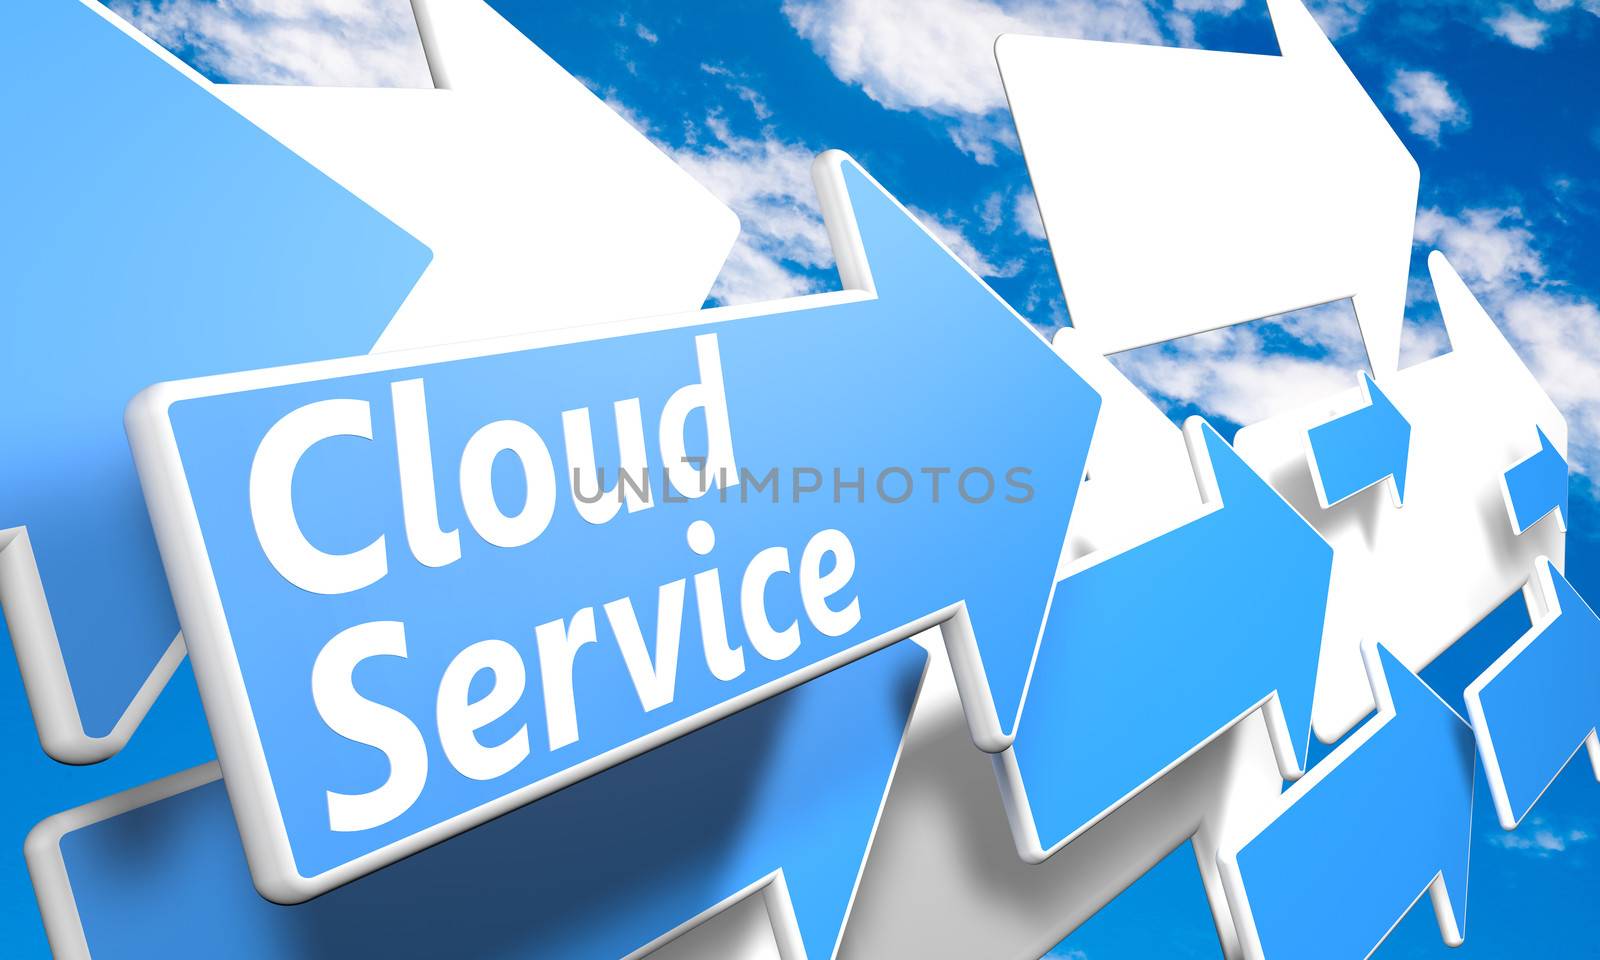 Cloud Service 3d render concept with blue and white arrows flying in a blue sky with clouds